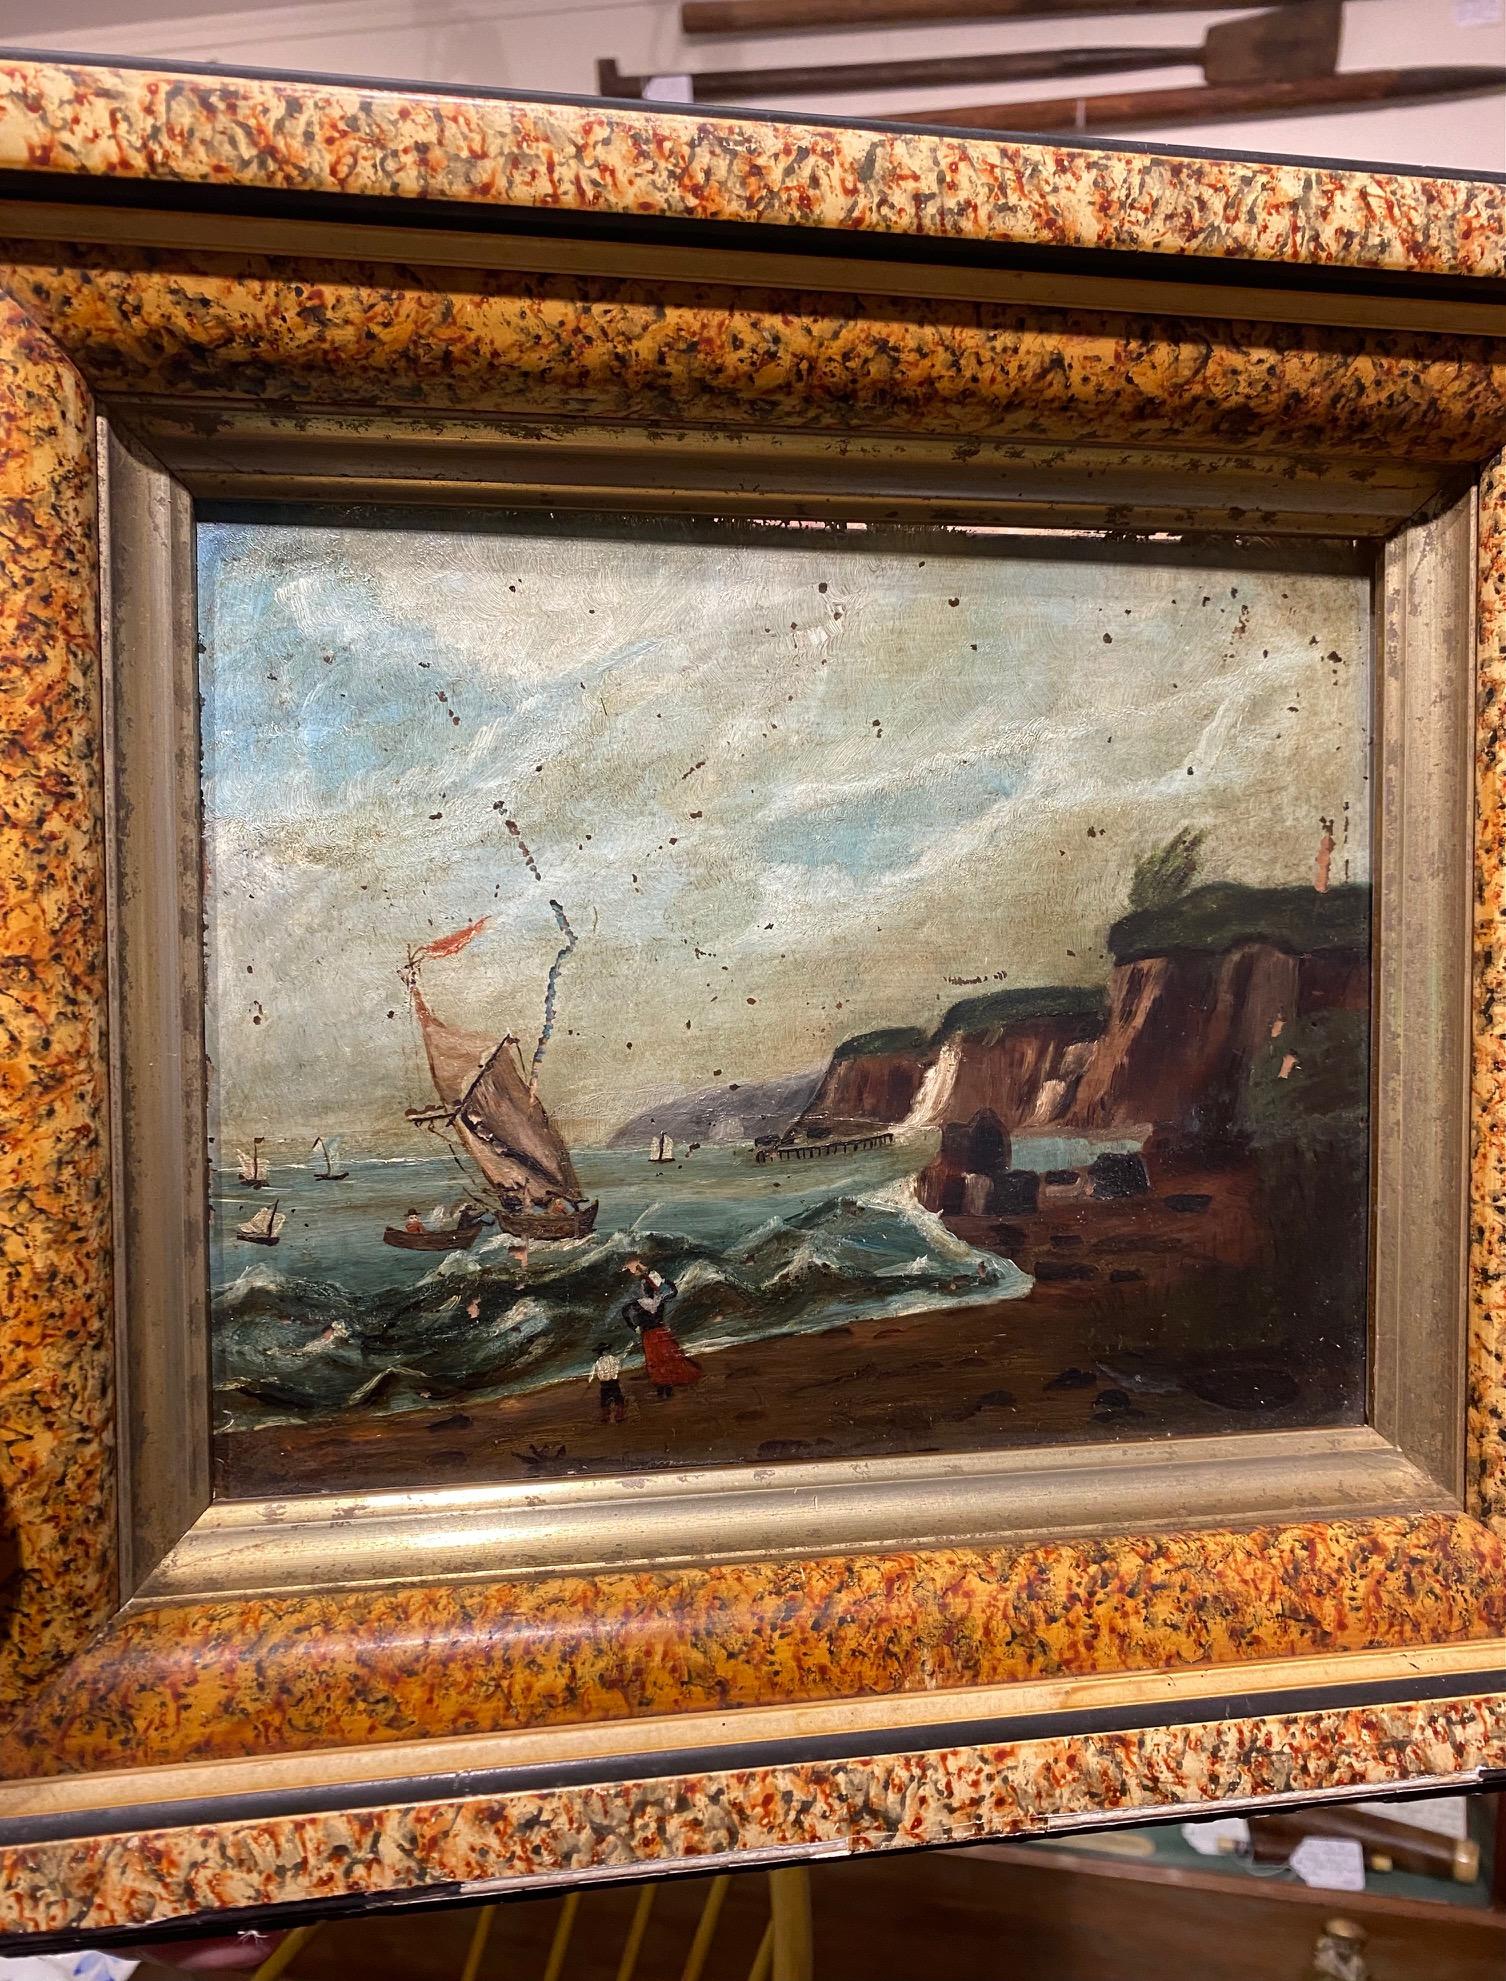 19th Century New England Folk Art reverse painting on glass coastal seascape, circa 1870s, unsigned, depicting a sloop in danger on the rocks, a dory coming to the rescue, figures watching on shore, and many other sails out to sea. Mounted in